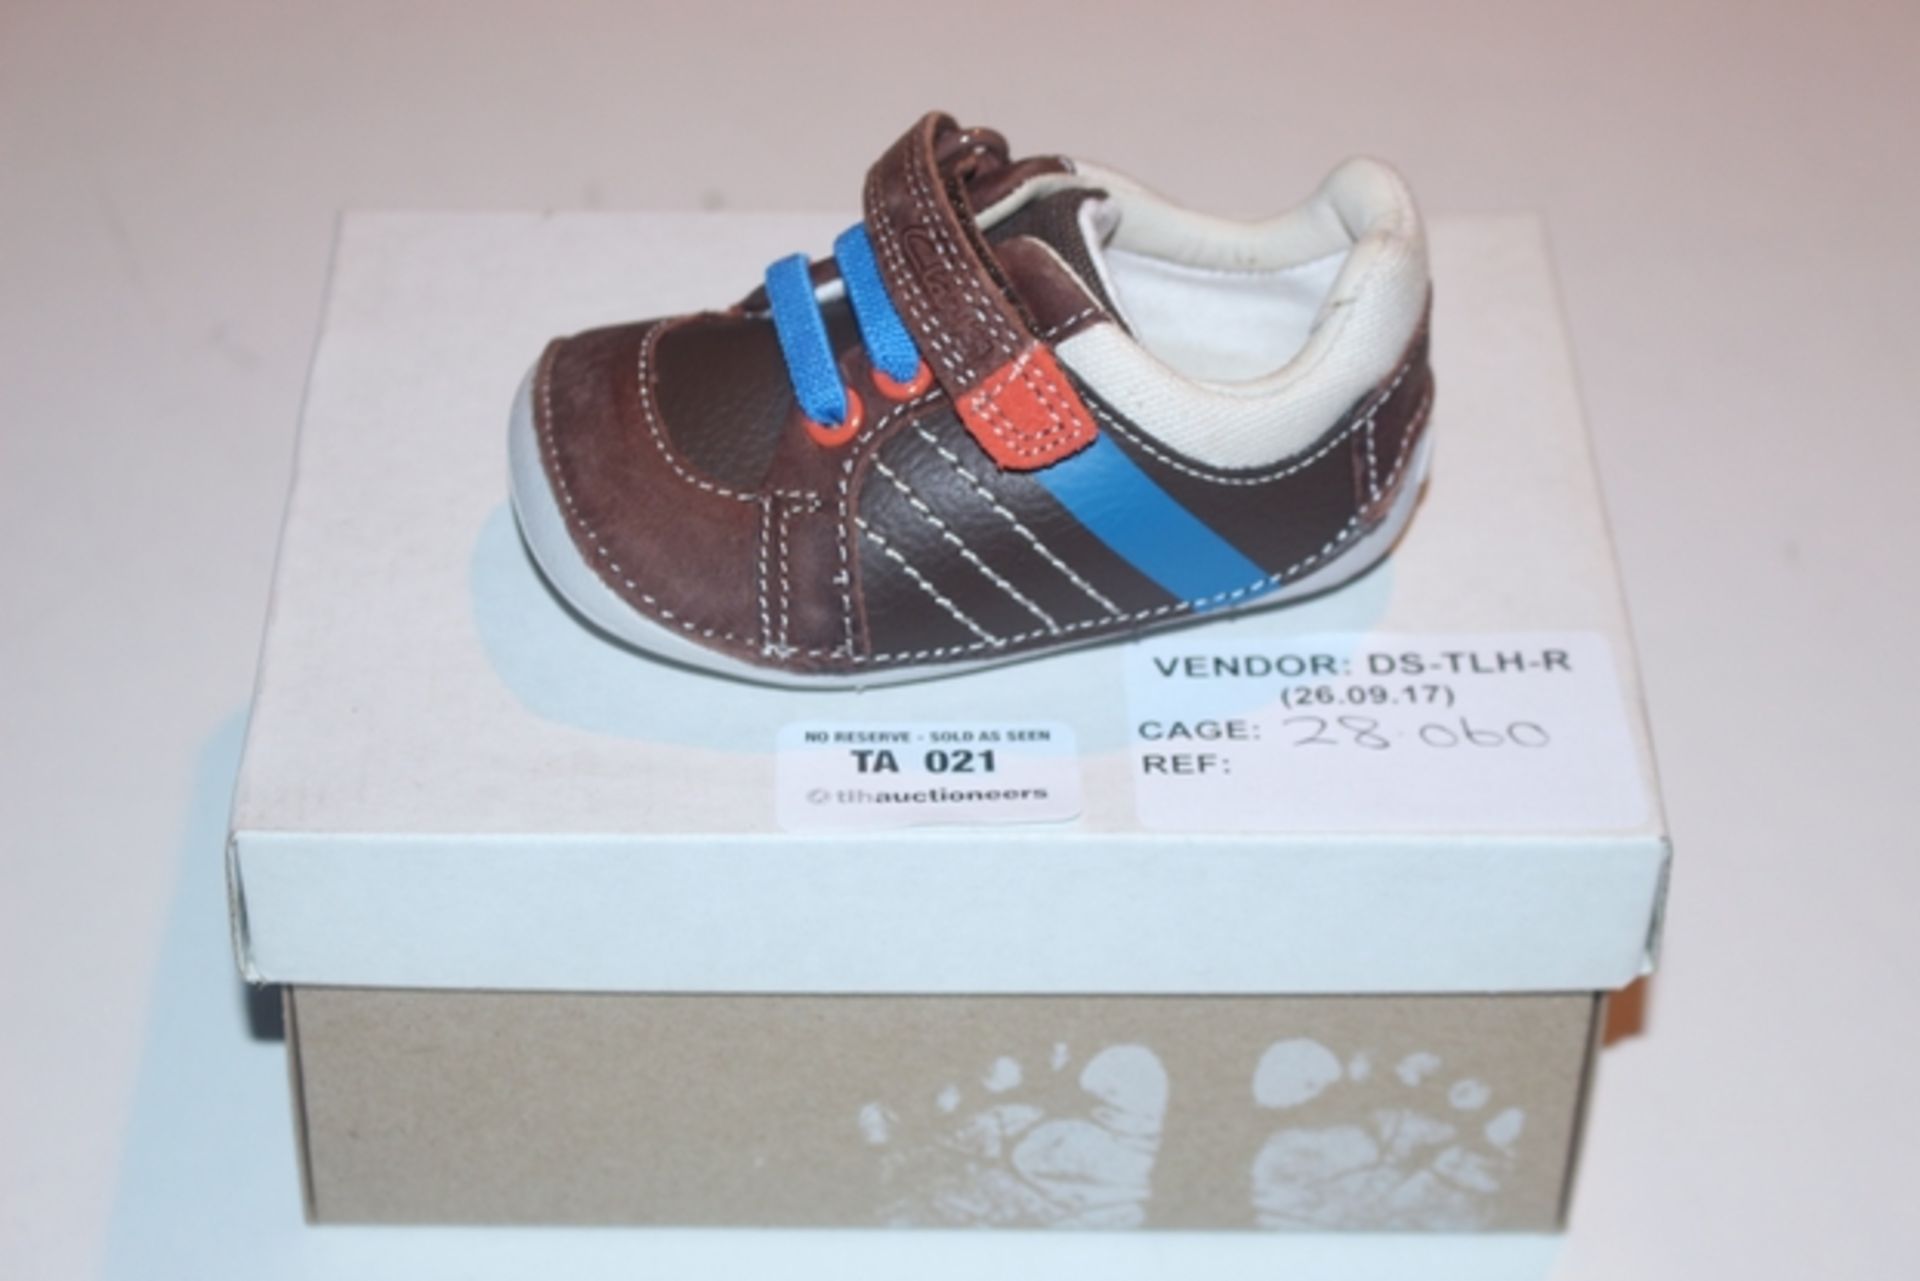 1X BOXED UNUSED PAIR OF CLARKS CHILDREN'S SHOES SIZE 2F RRP £30 (DS-TLH-R) (28.060)